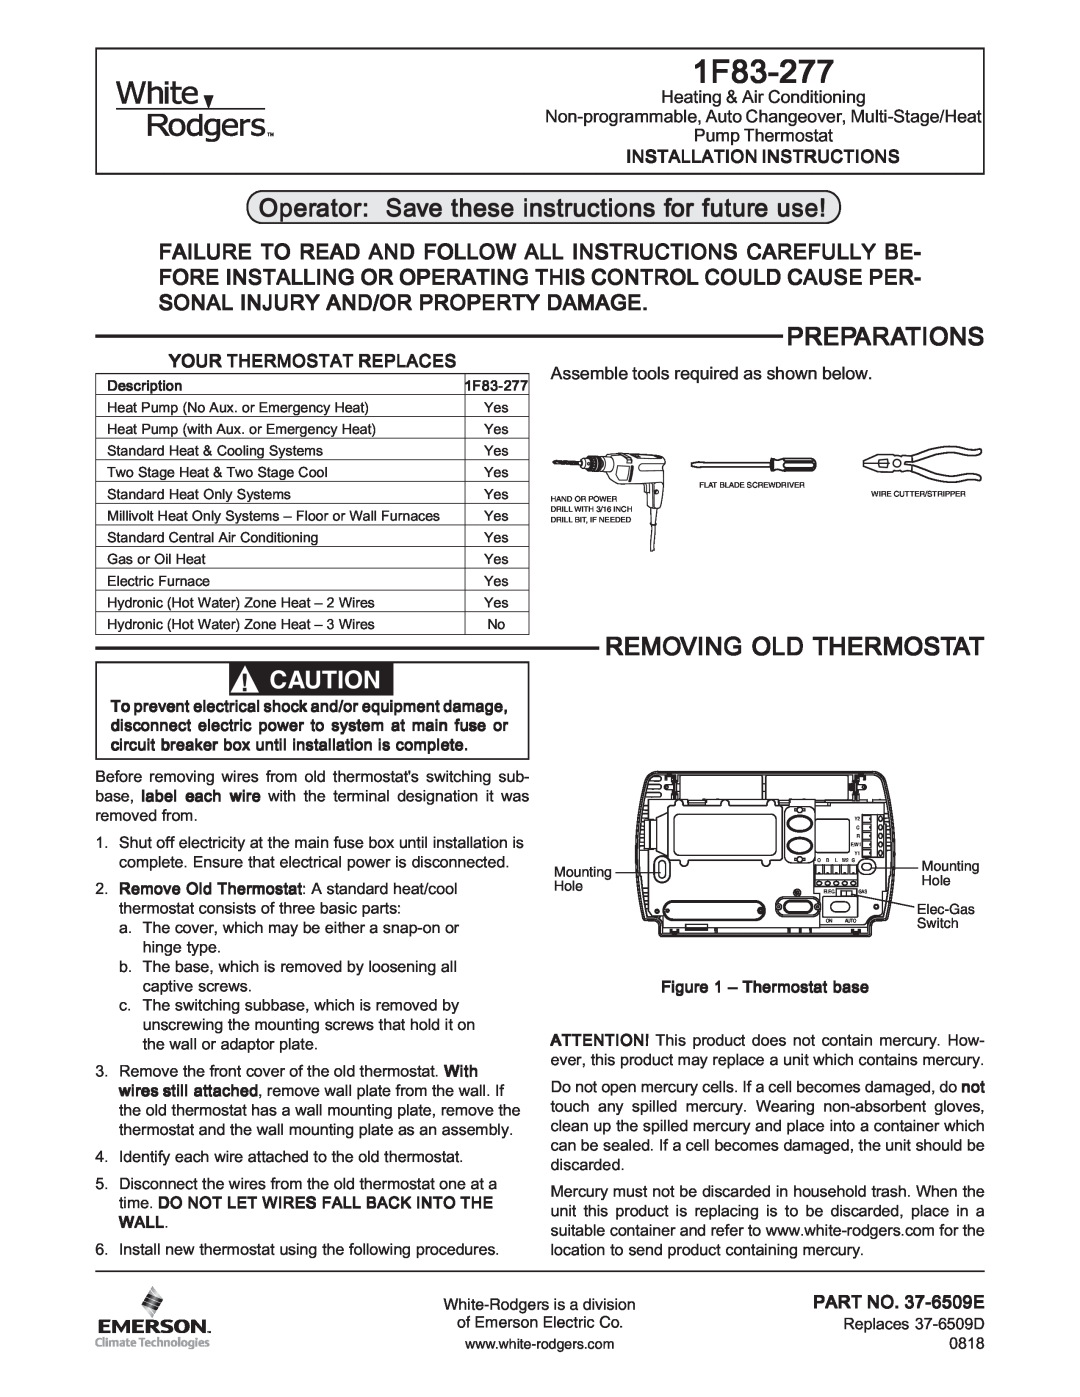 Emerson 1F83-277 installation instructions Operator Save these instructions for future use, Preparations 